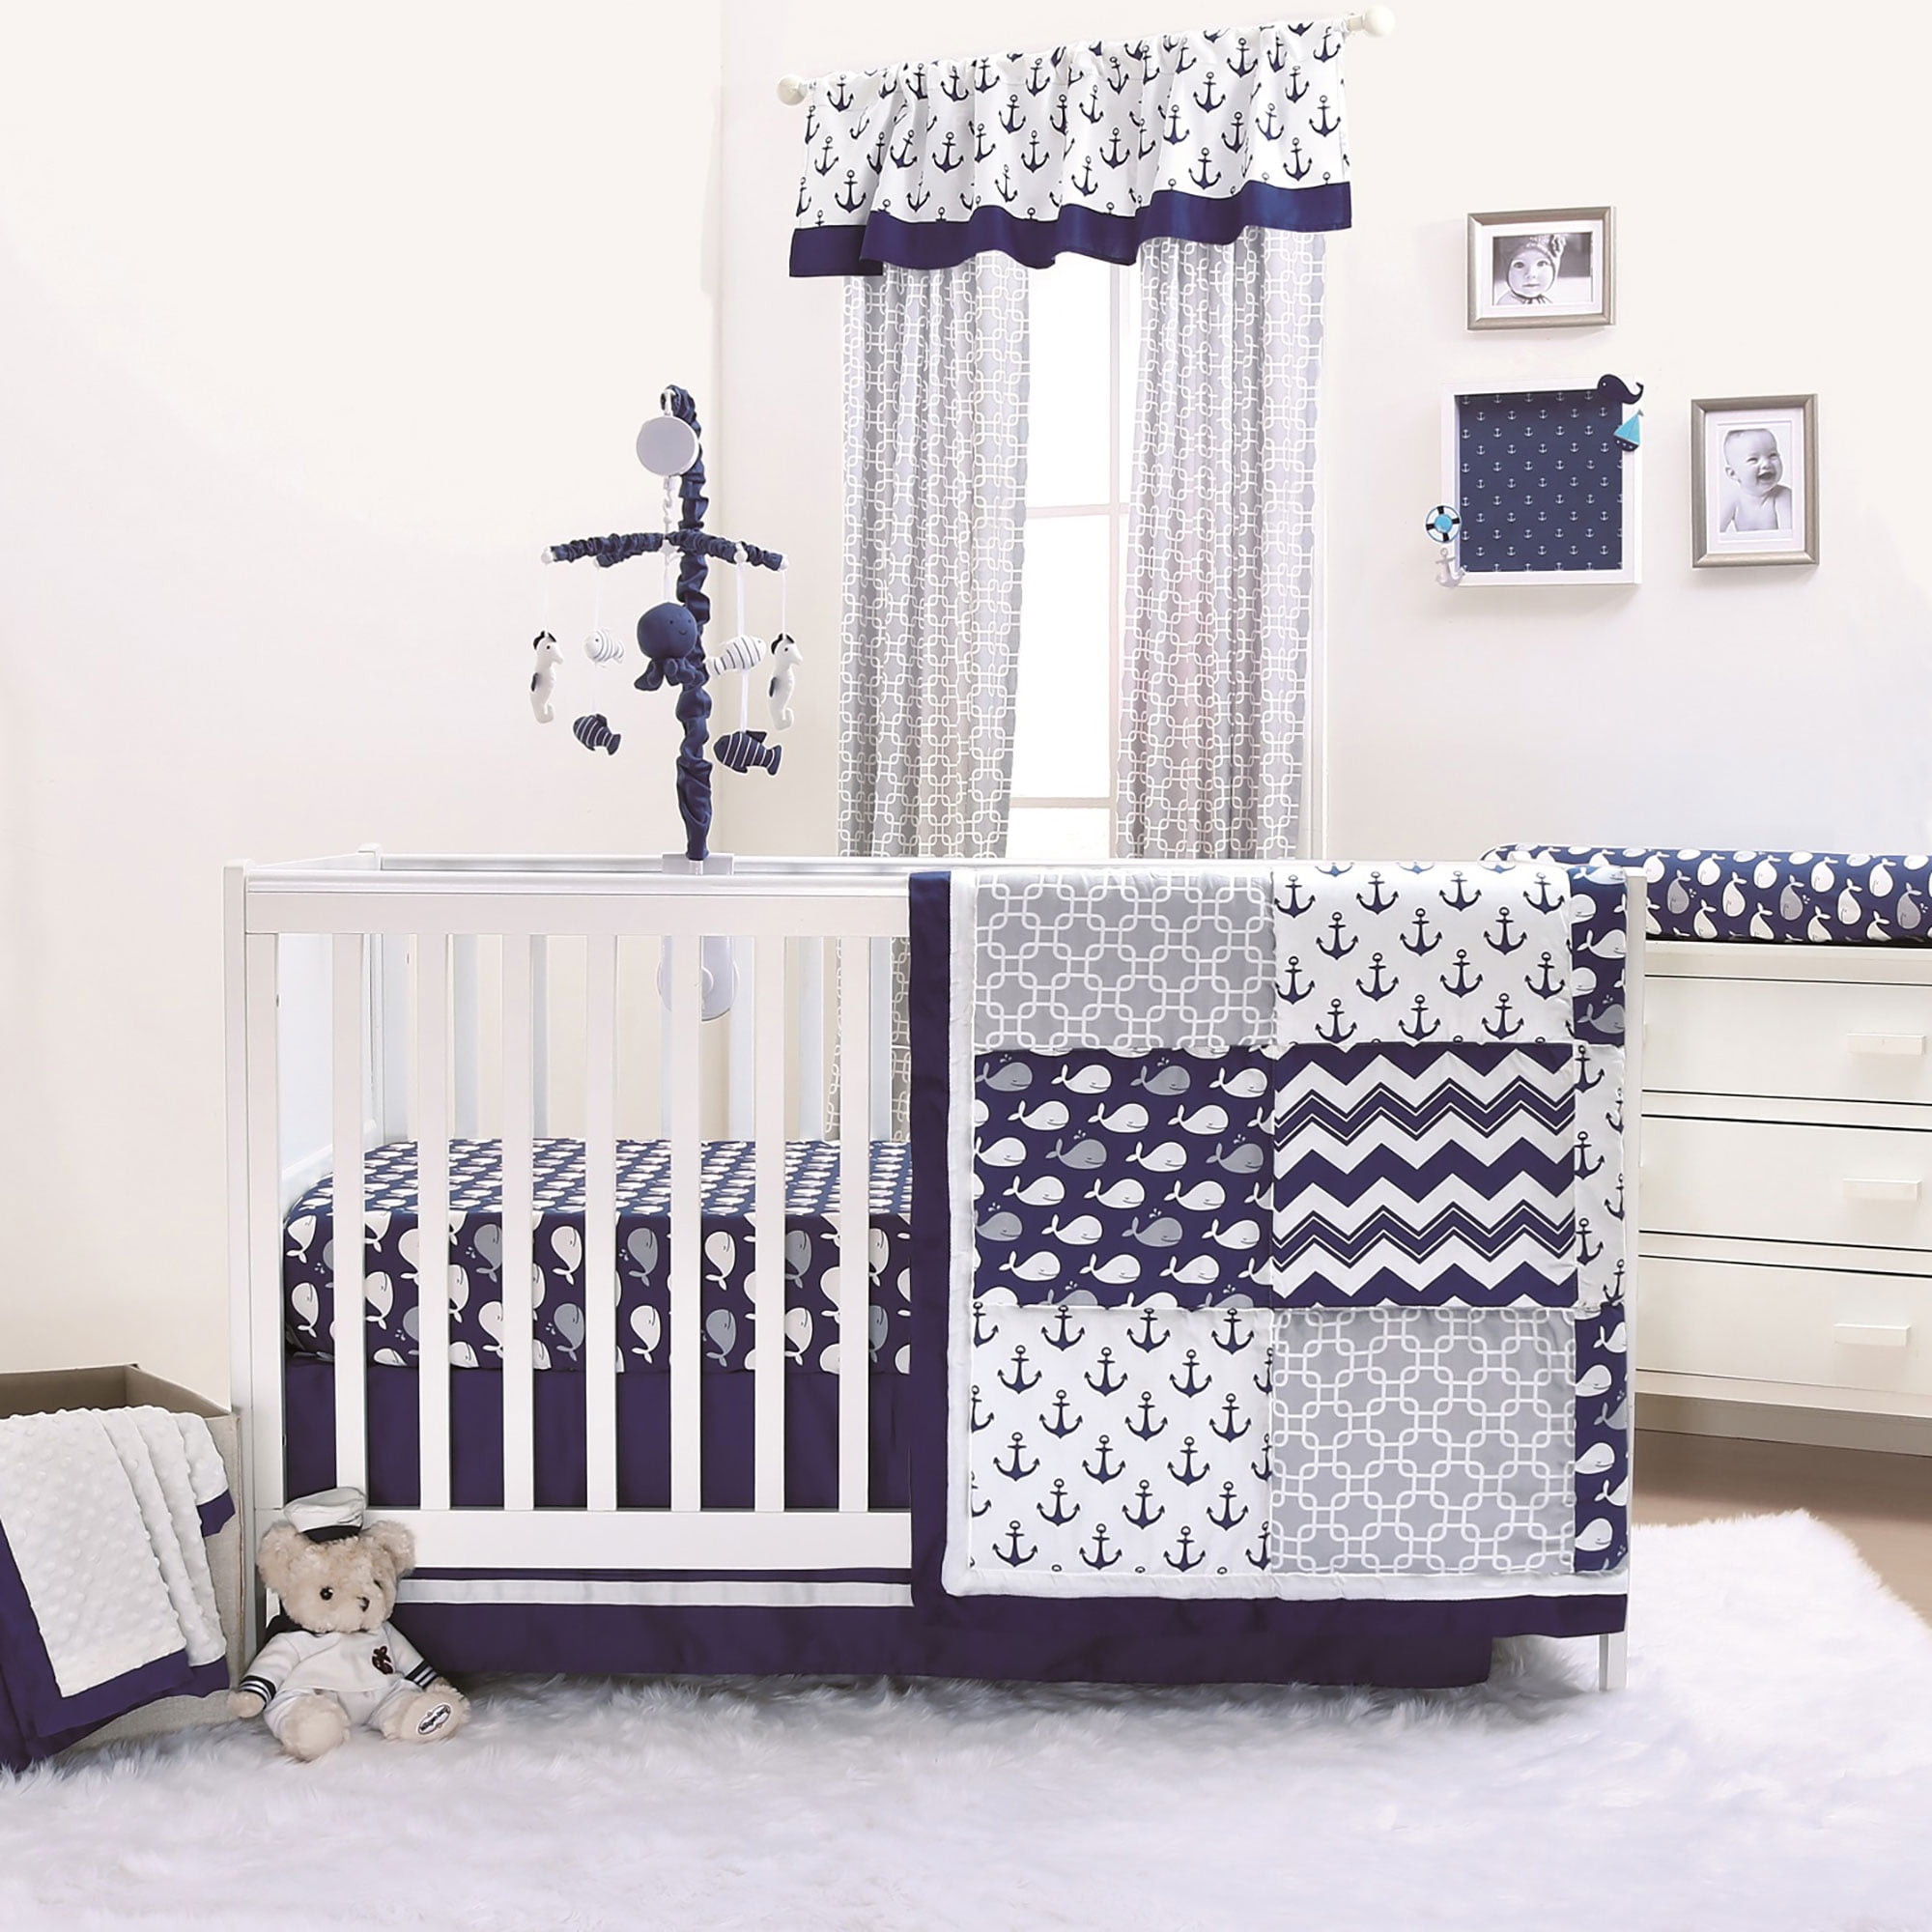 Anchor Nautical Theme 3 Piece Baby Crib Bedding Set in Pink/Navy by The Peanut Shell 